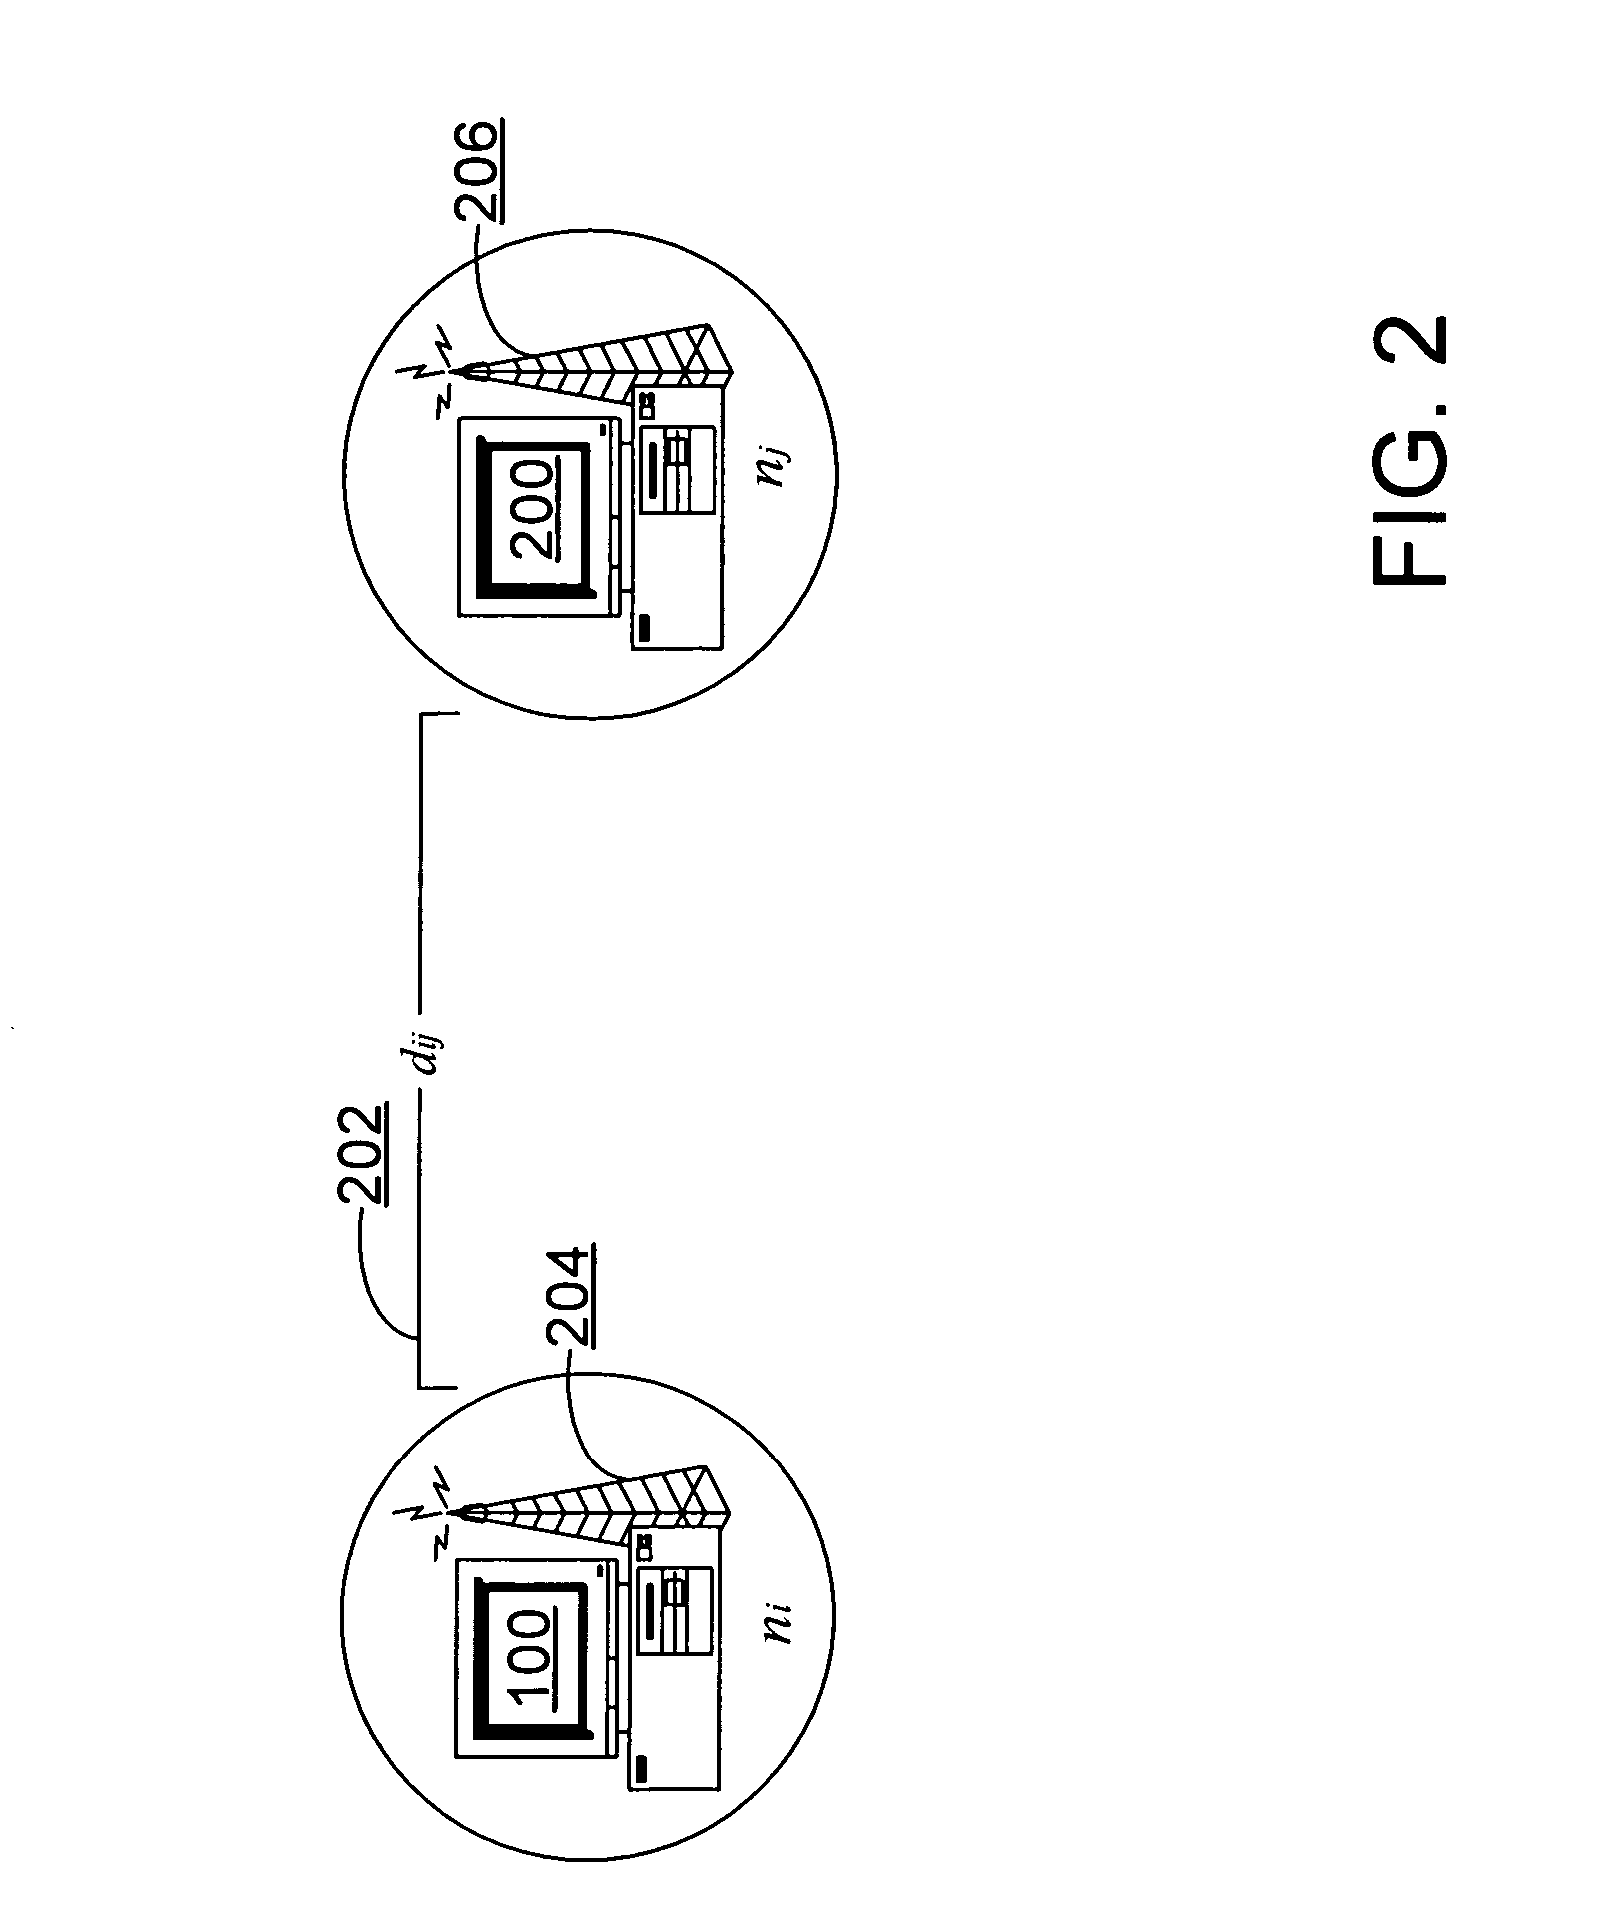 Model and method for computing performance bounds in multi-hop wireless networks